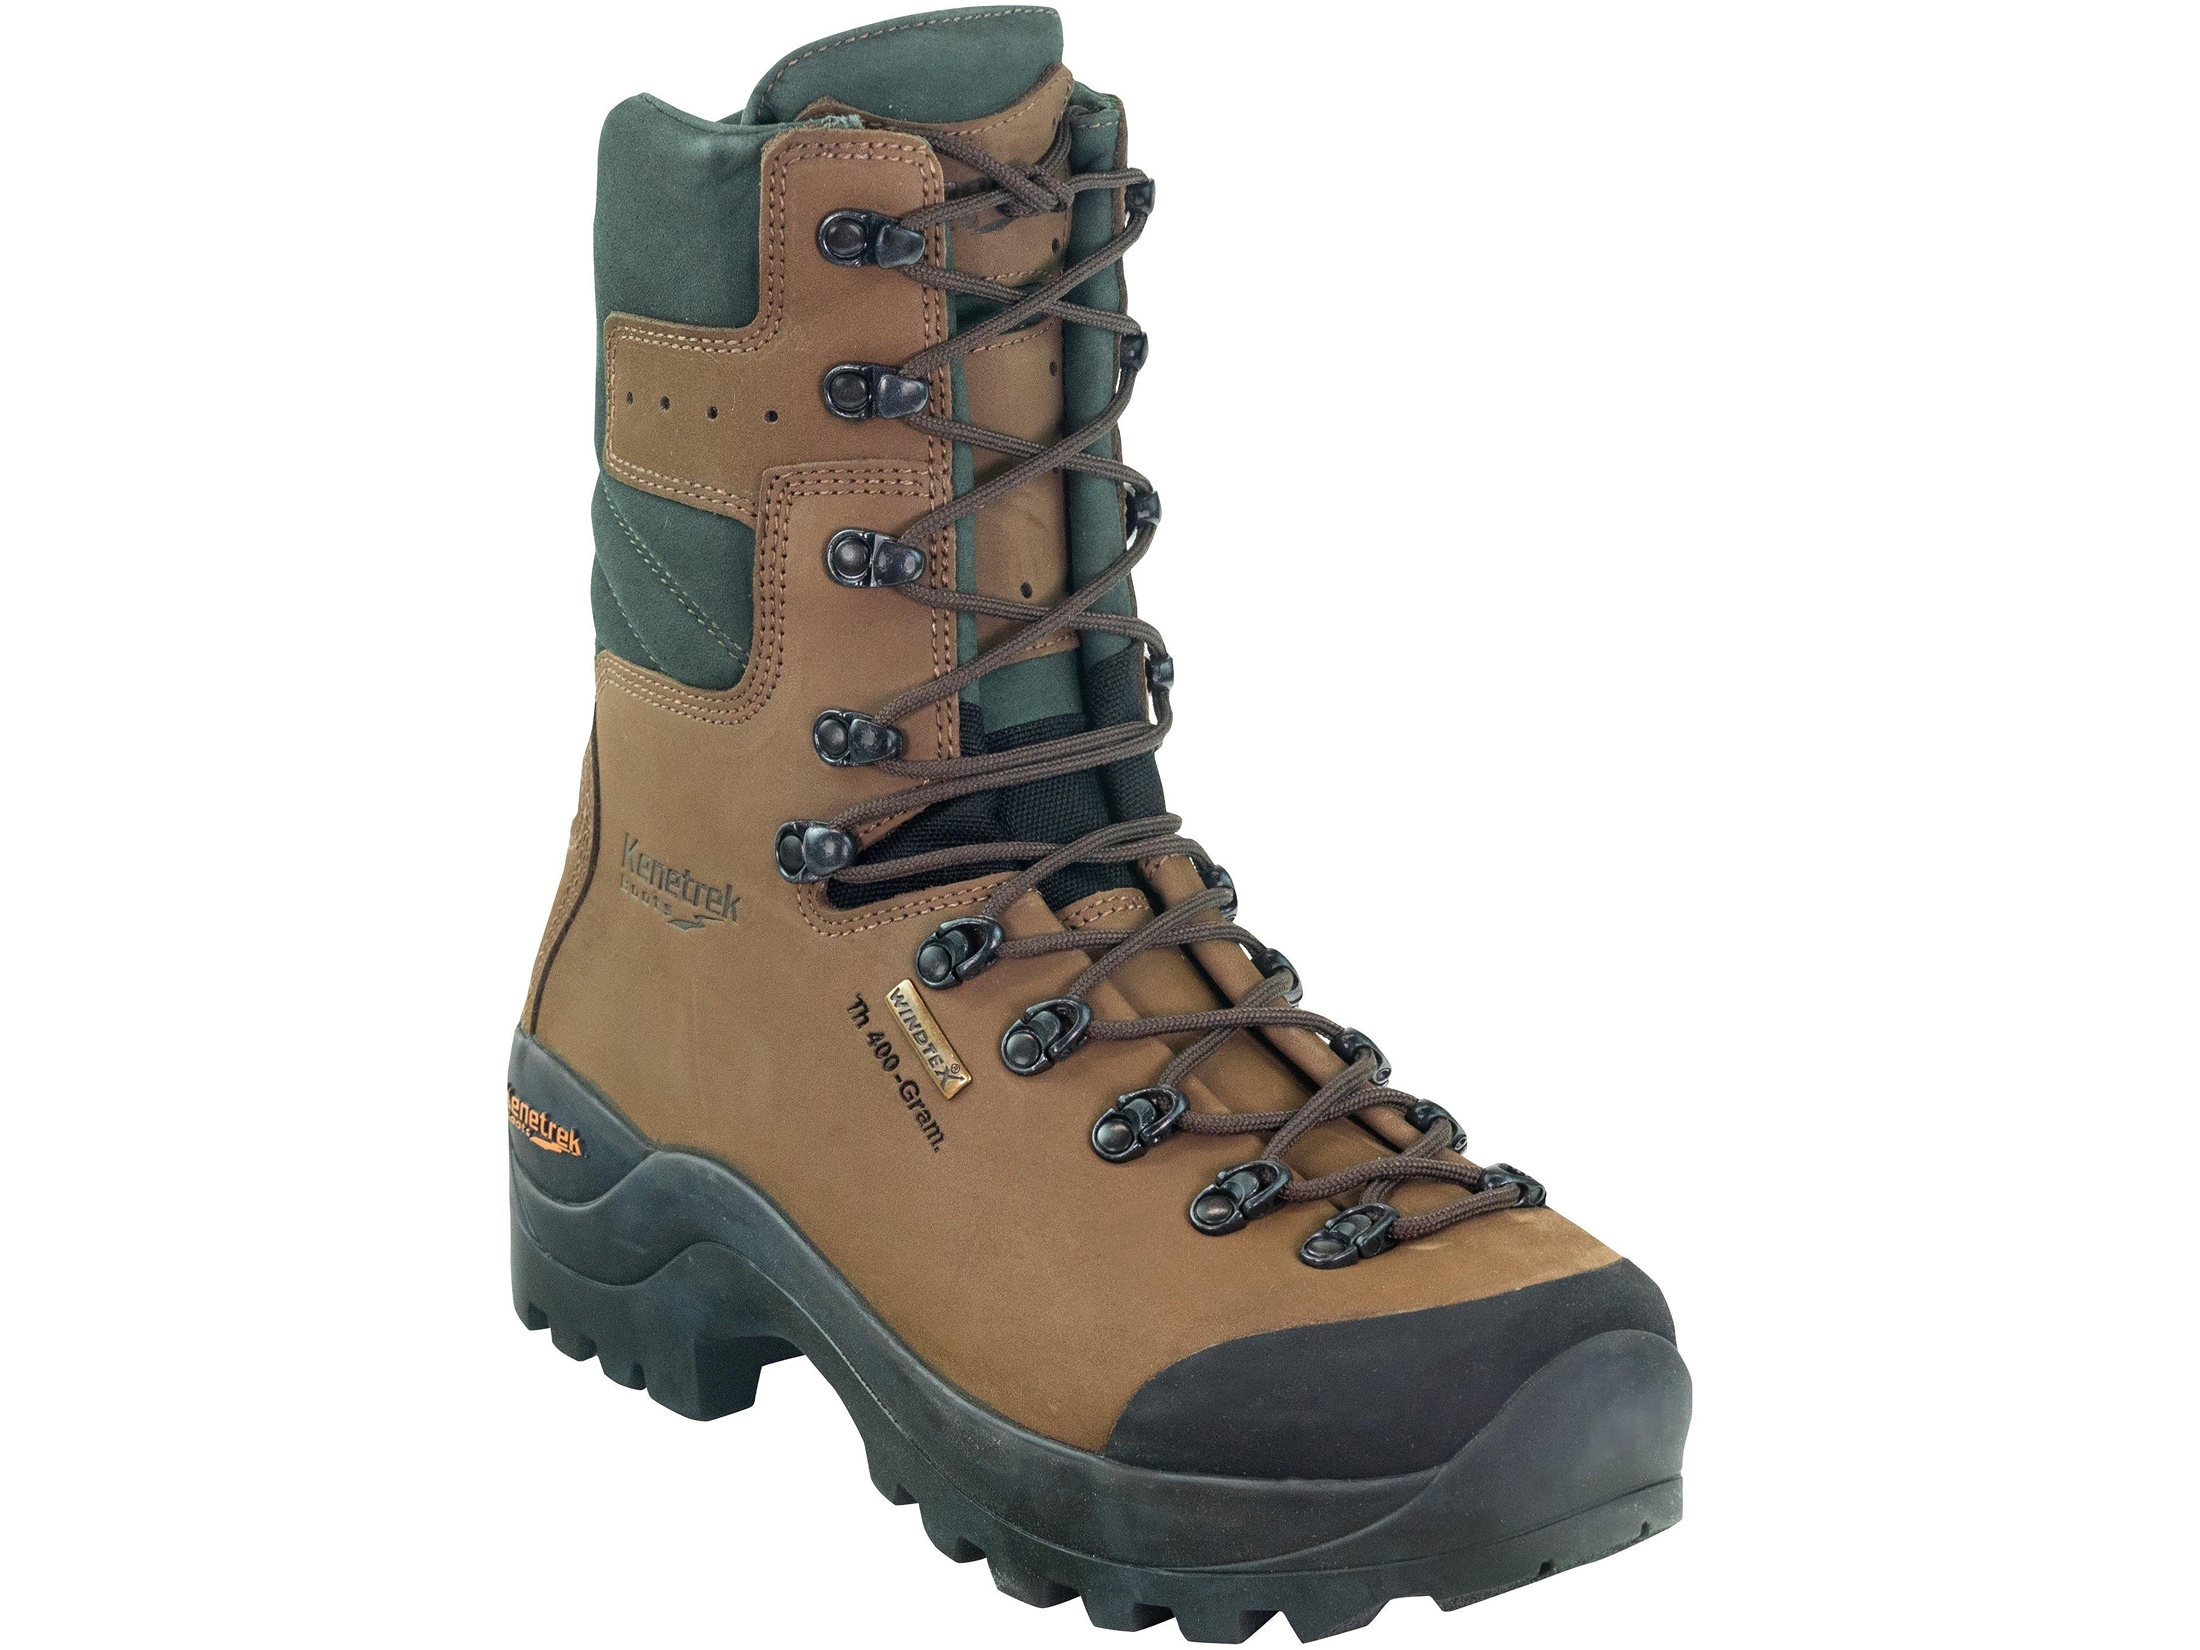 Kenetrek Mountain Guide 10 400 Gram Insulated Hunting Boots Leather